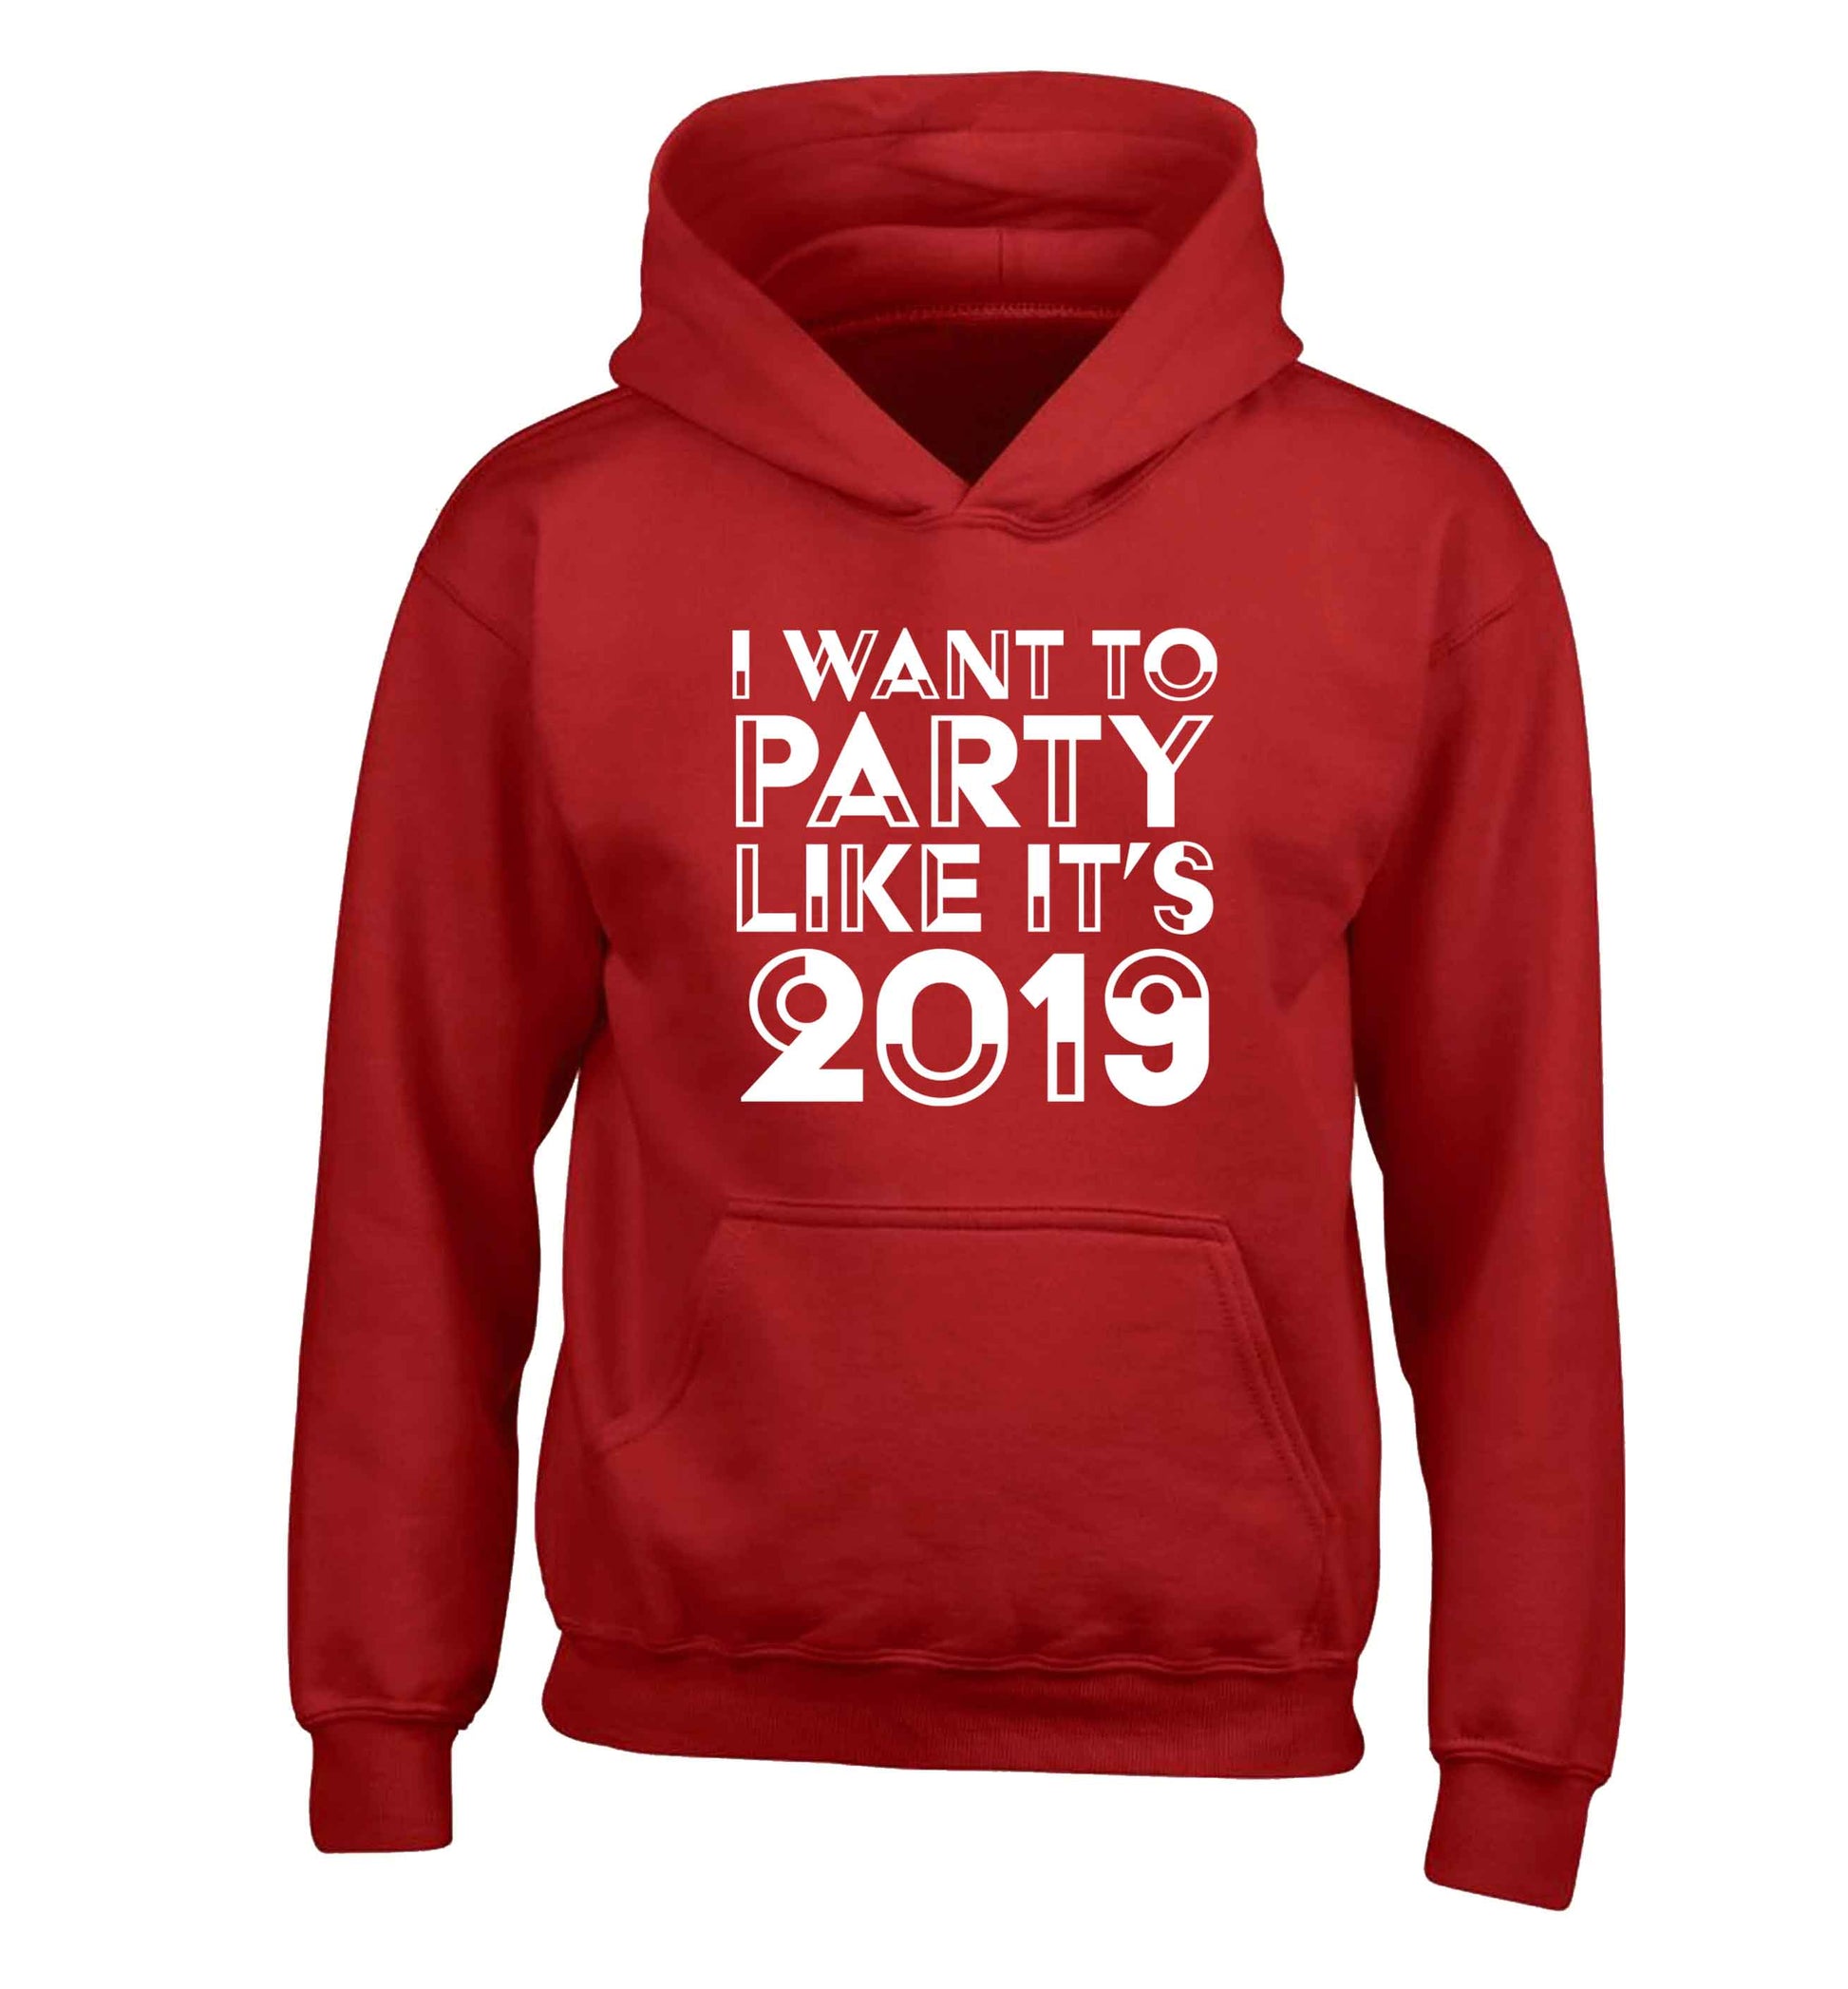 I want to party like it's 2019 children's red hoodie 12-13 Years